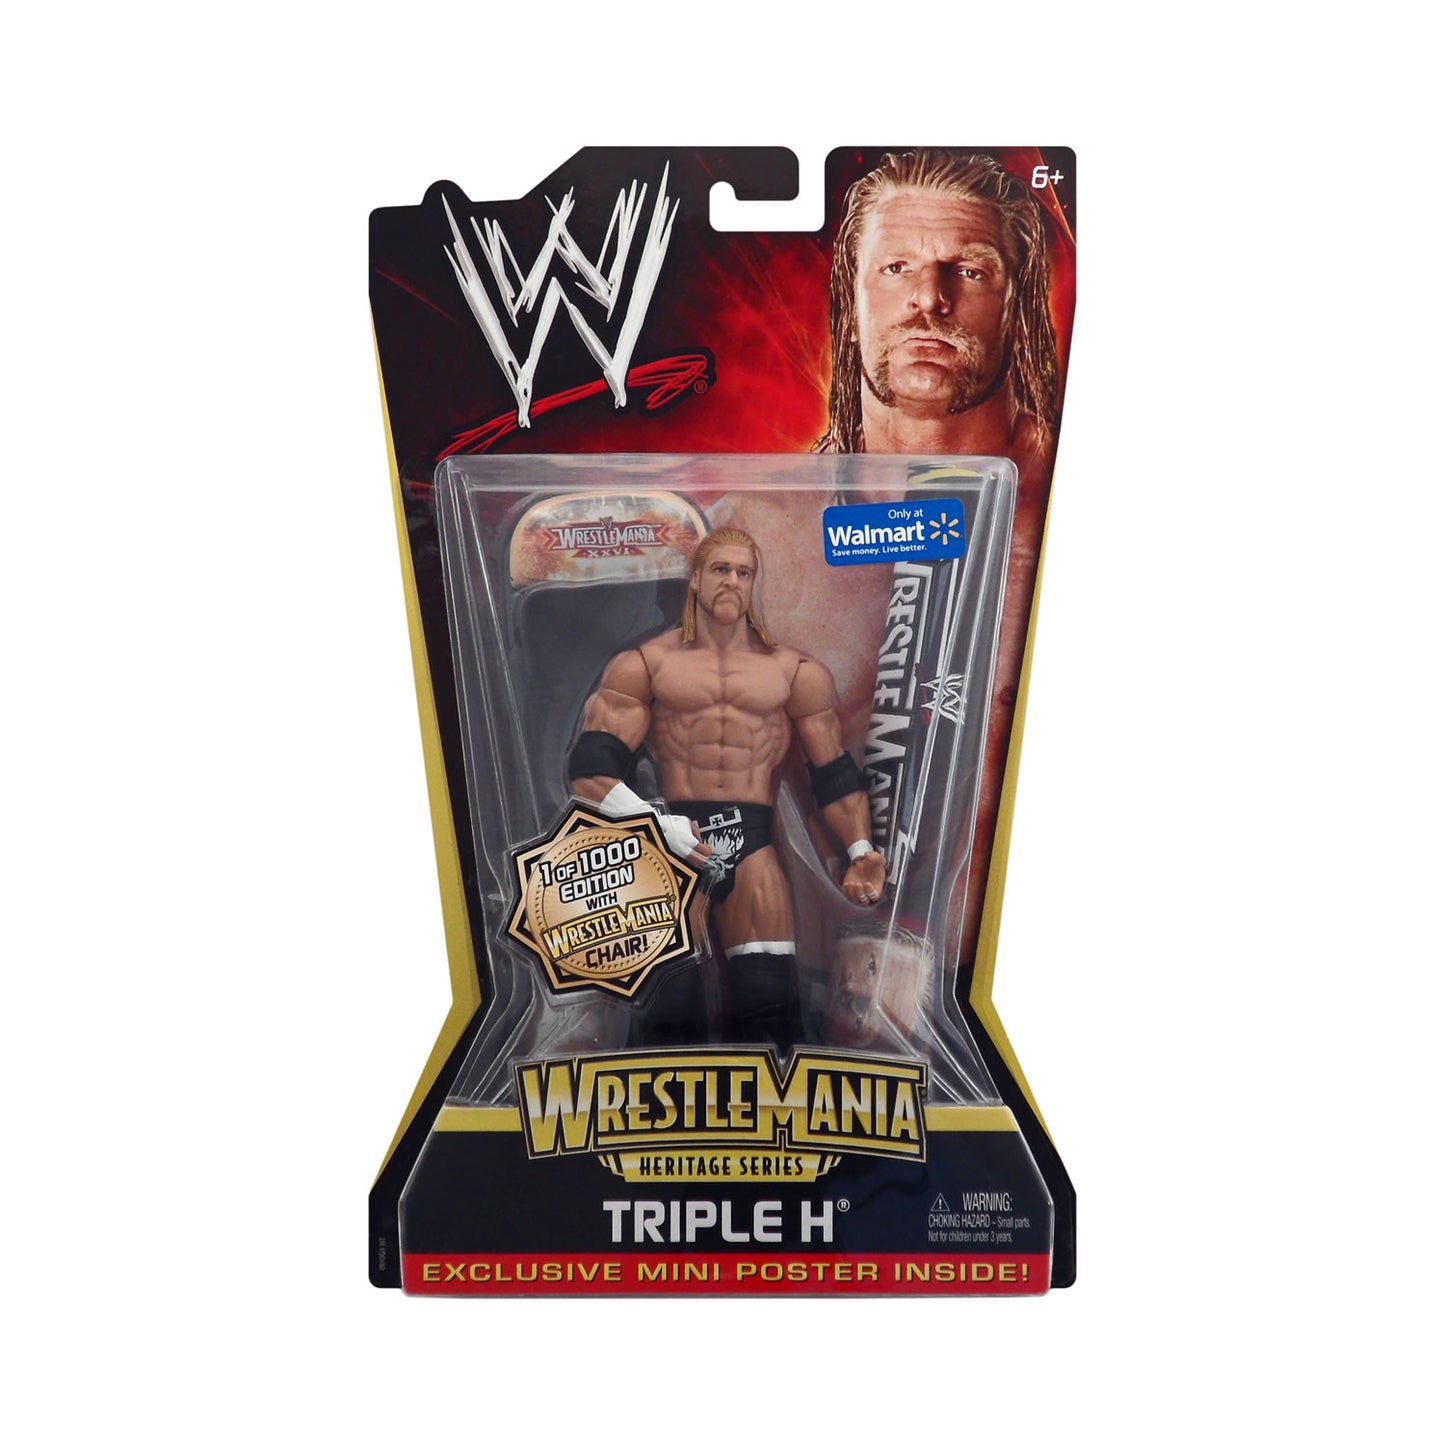 WWE WrestleMania Heritage Series Triple H with WrestleMania Chair Action Figure (1 of 1000)